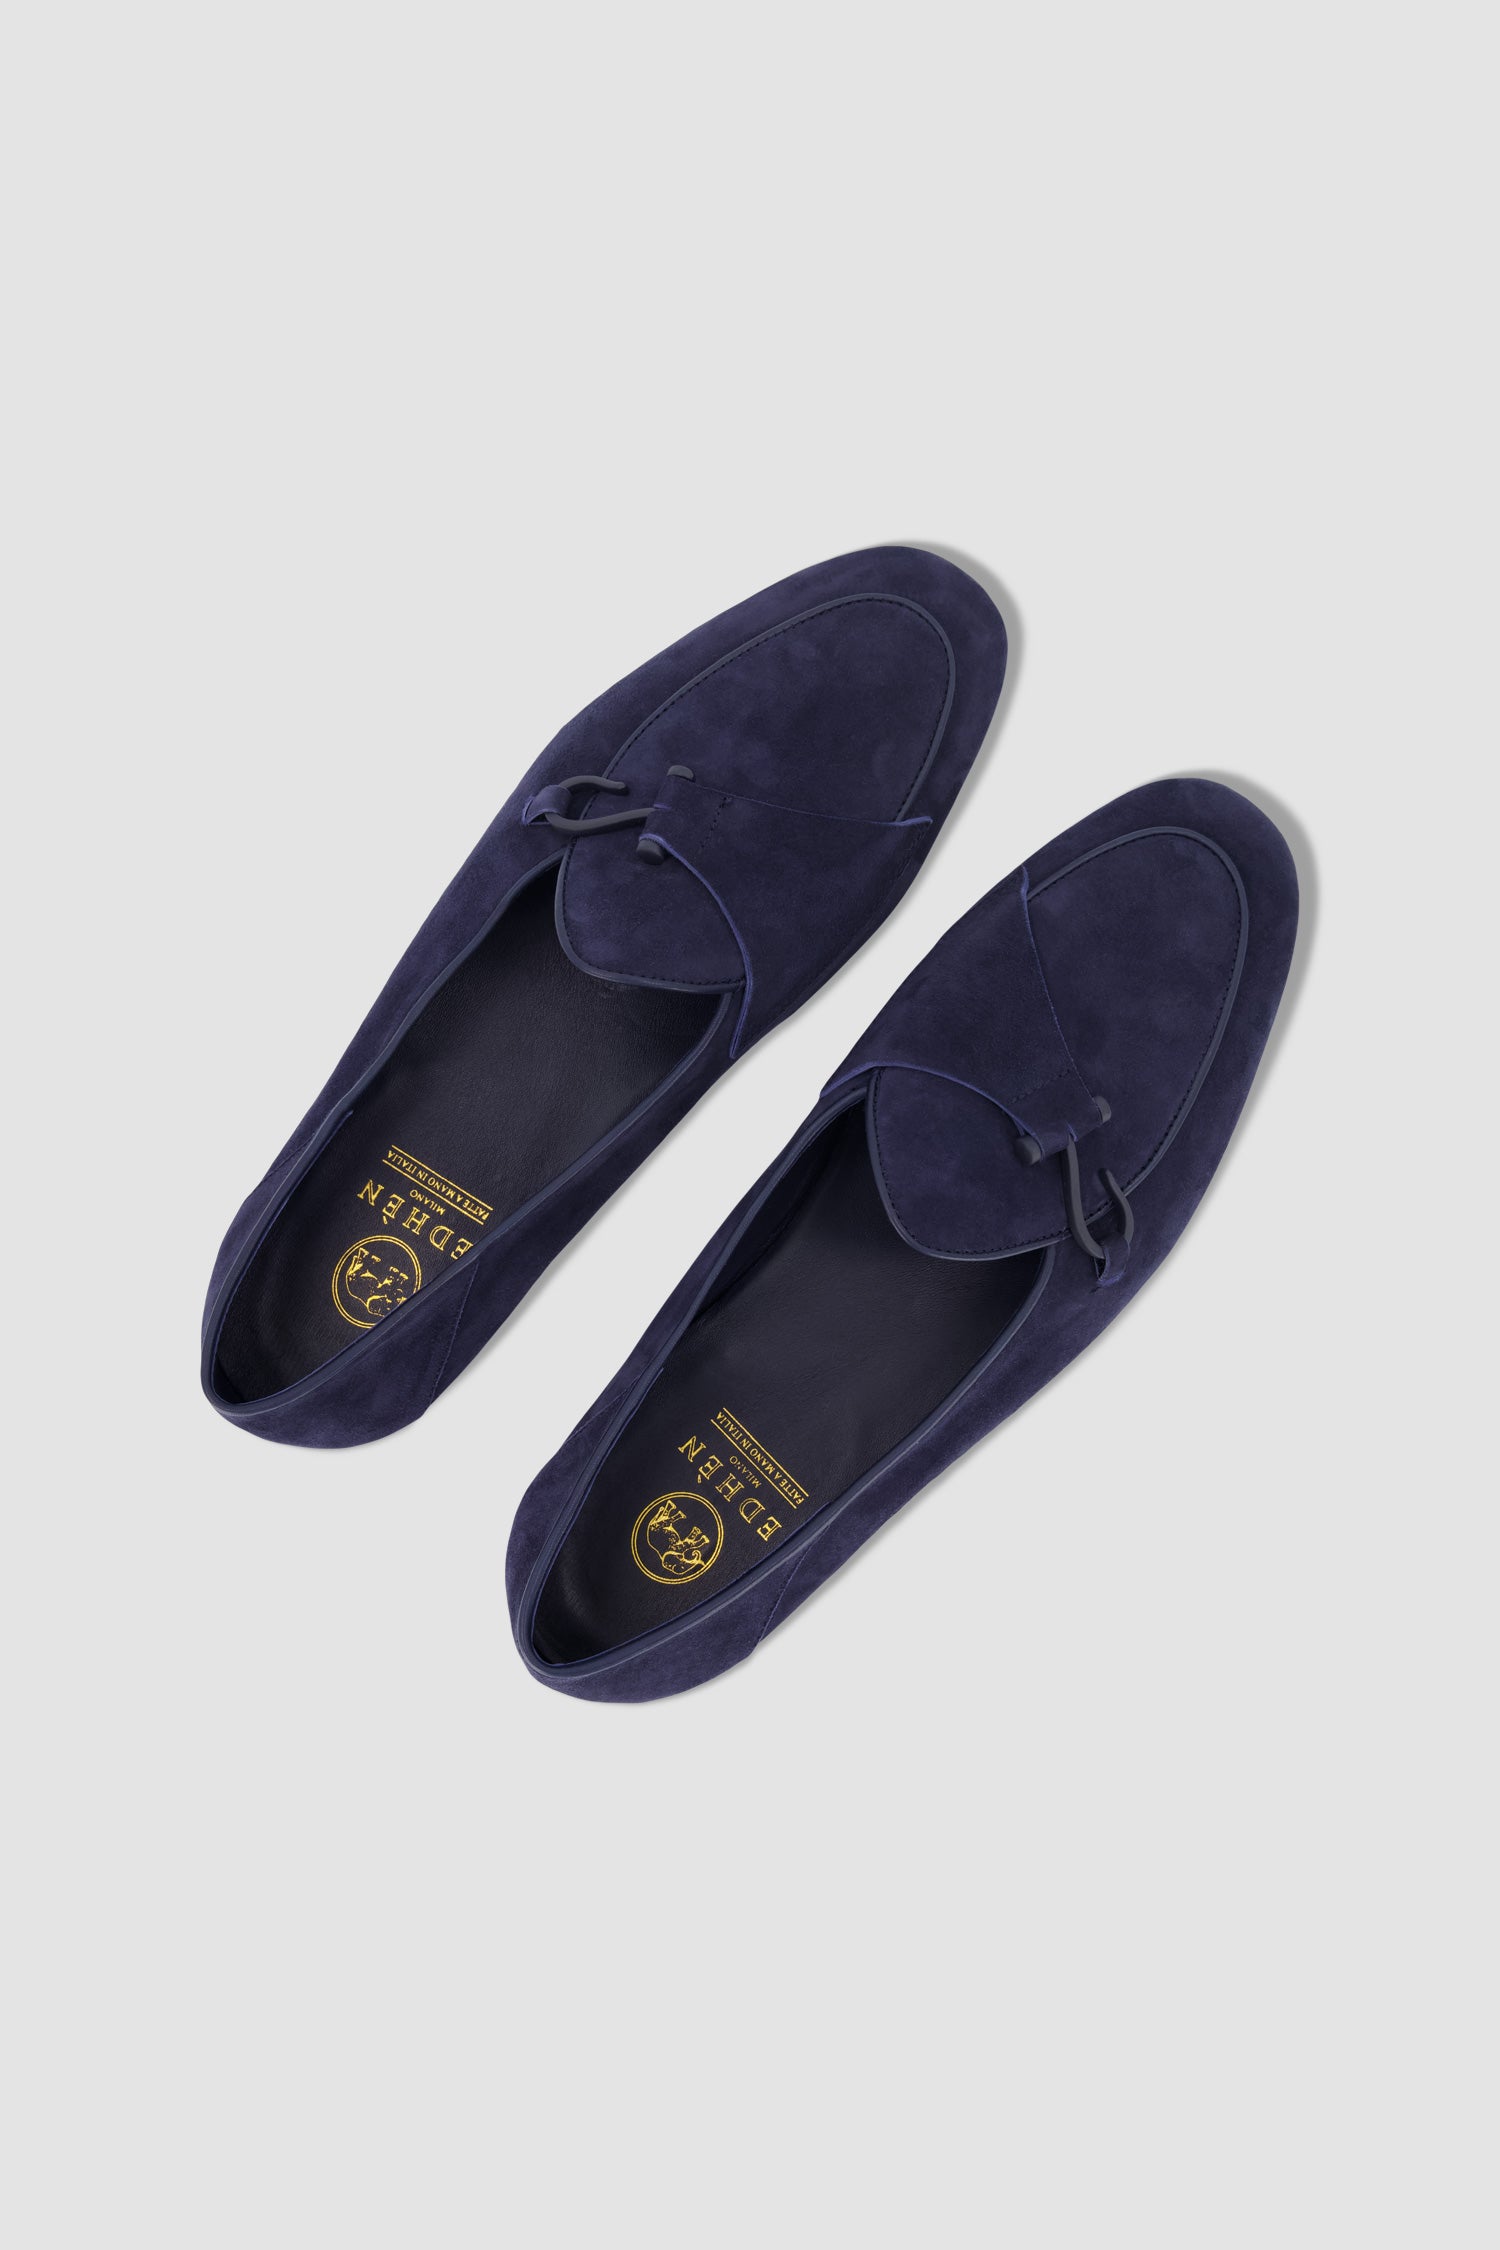 Edhen Milano Comporta Fly Blue Suede Loafers